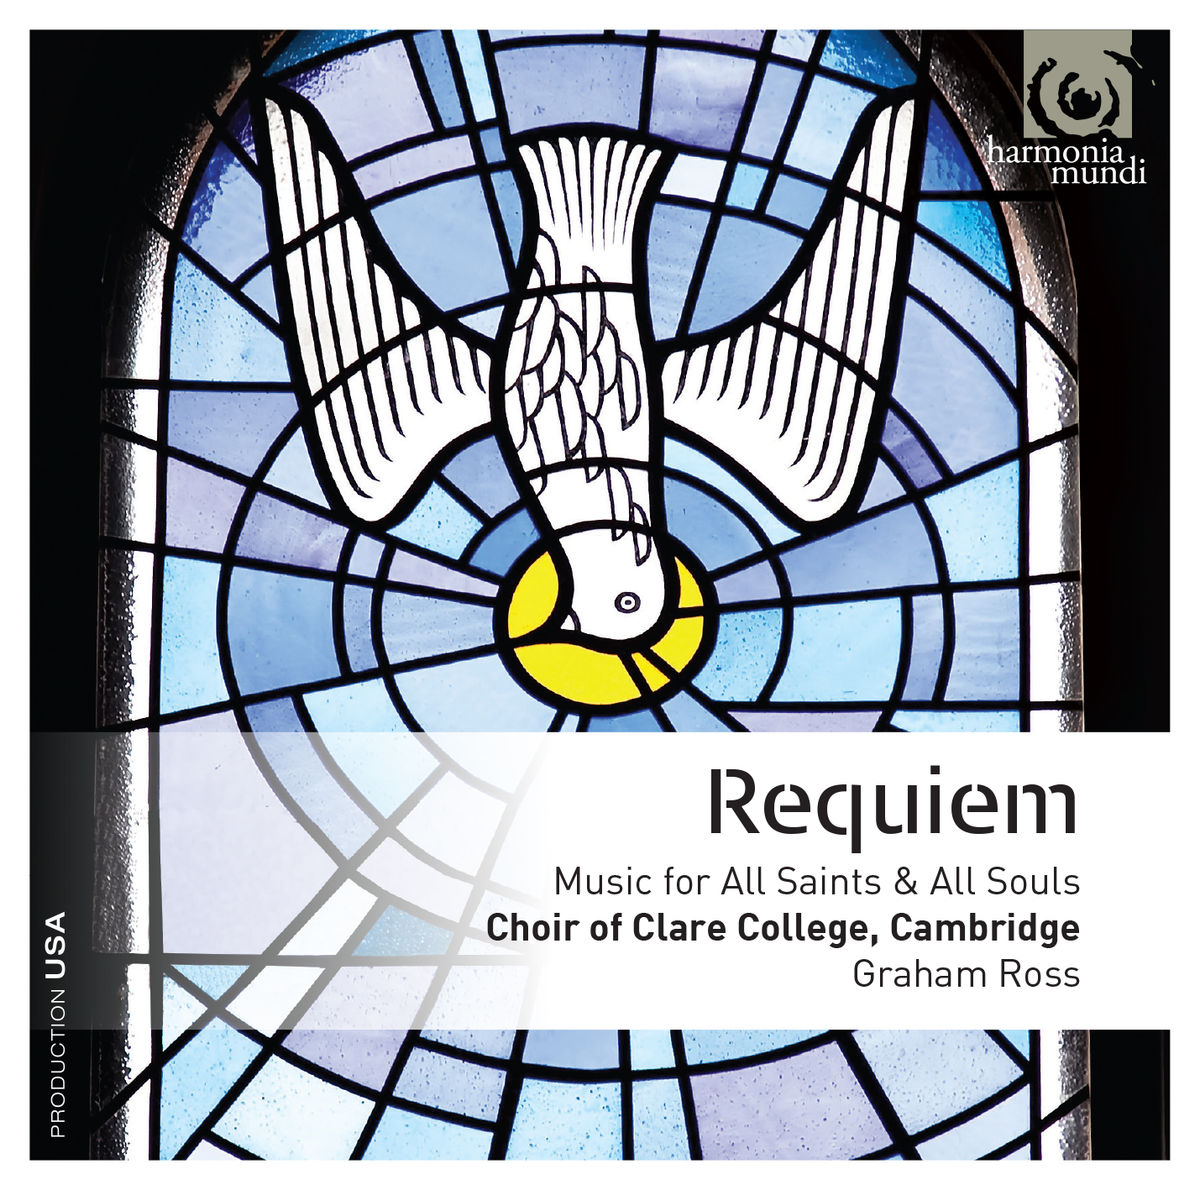 Choir of Clare College, Cambridge and Graham Ross - Requiem: Music for All Saints & All Souls (2015) [Qobuz FLAC 24bit/96kHz]